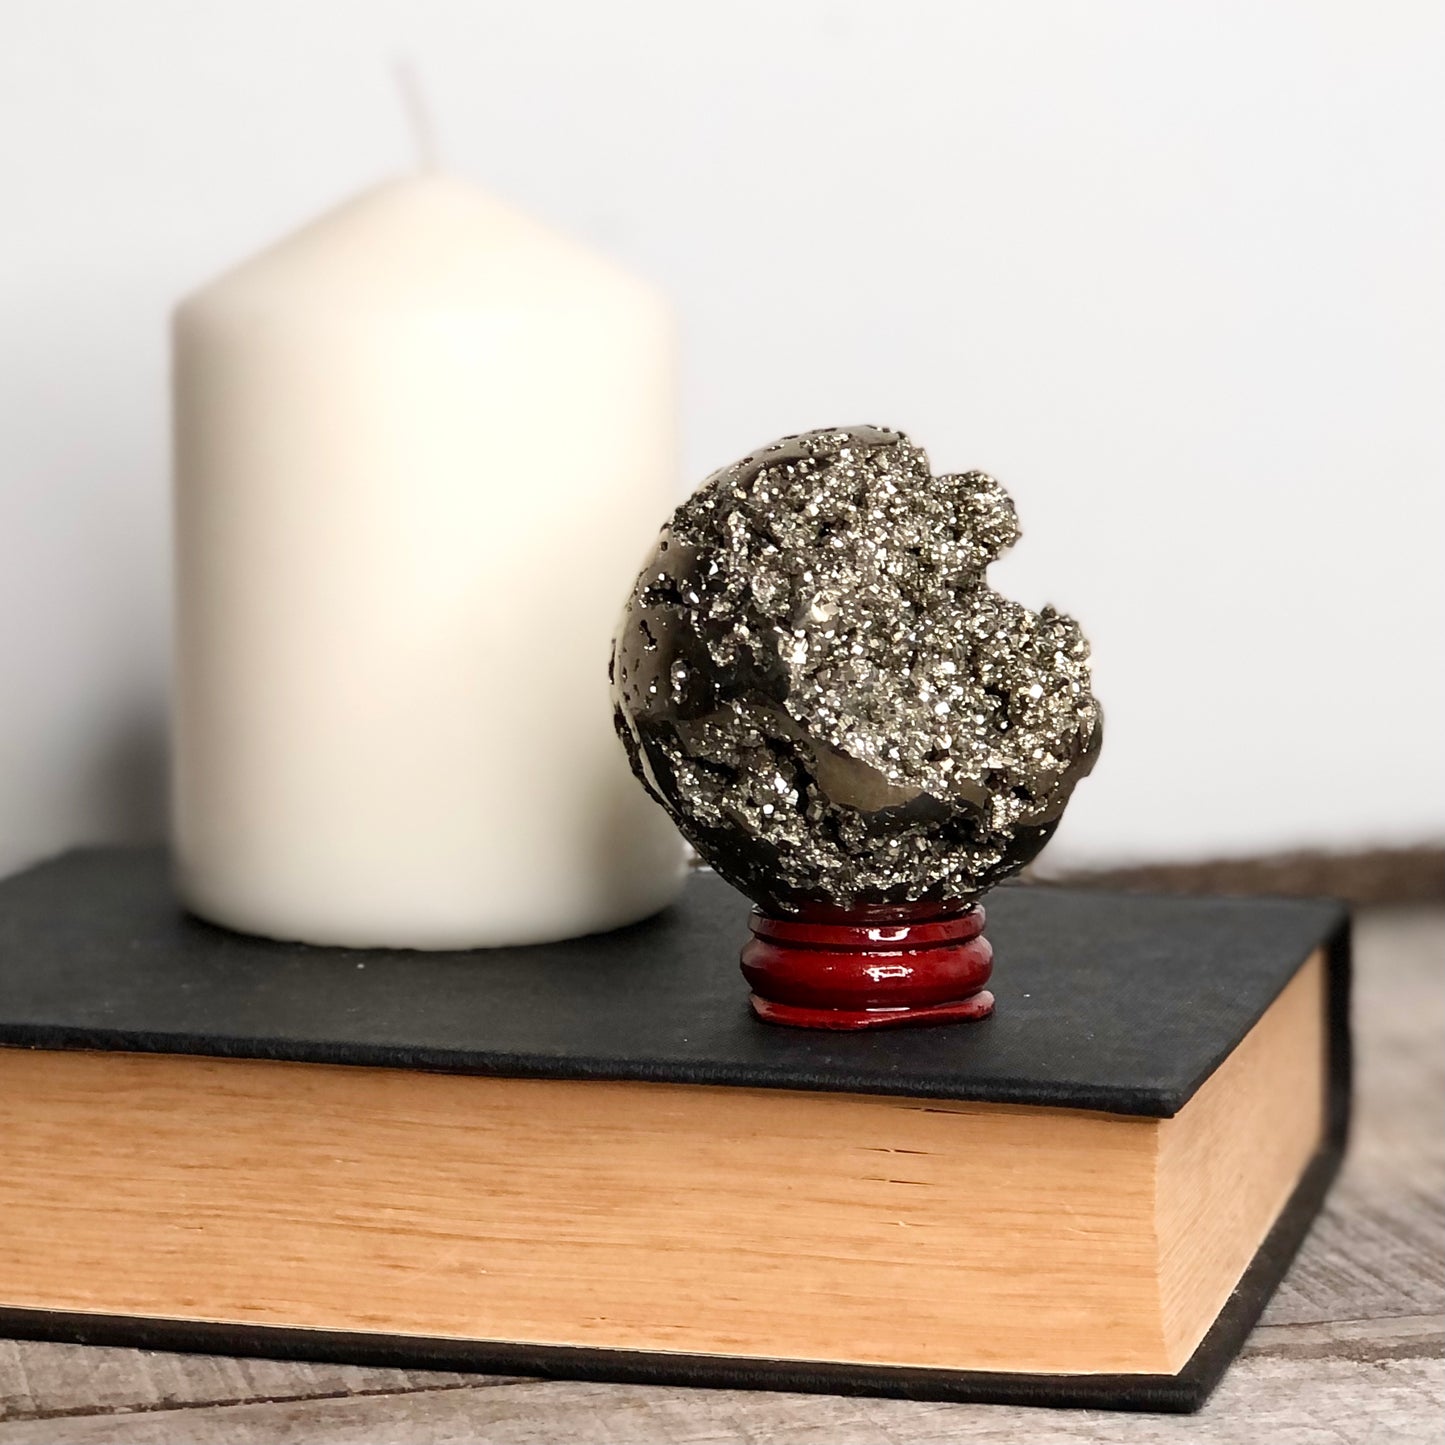 Pyrite polished and cubic crystal sphere A1 quality